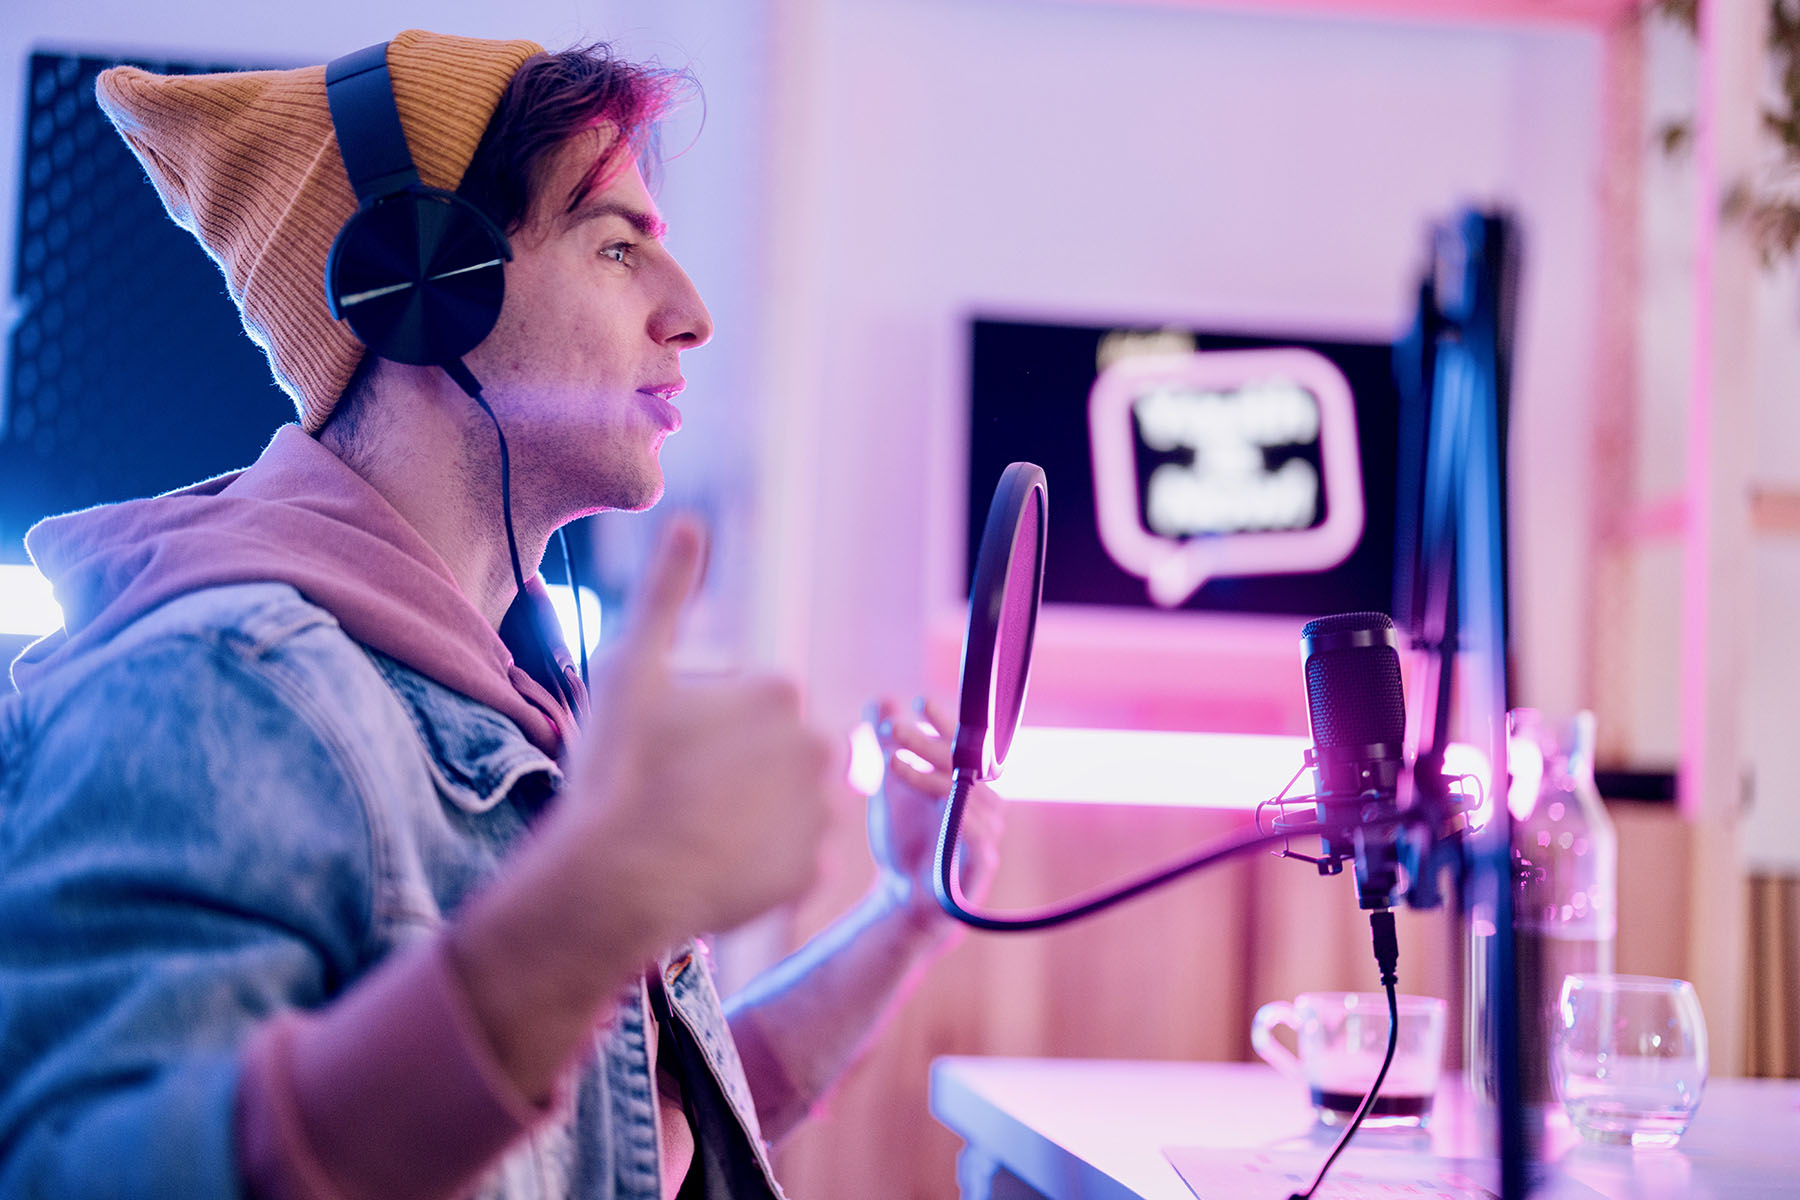 Man wearing a beanie and headphones talking into a professional-looking microphone.